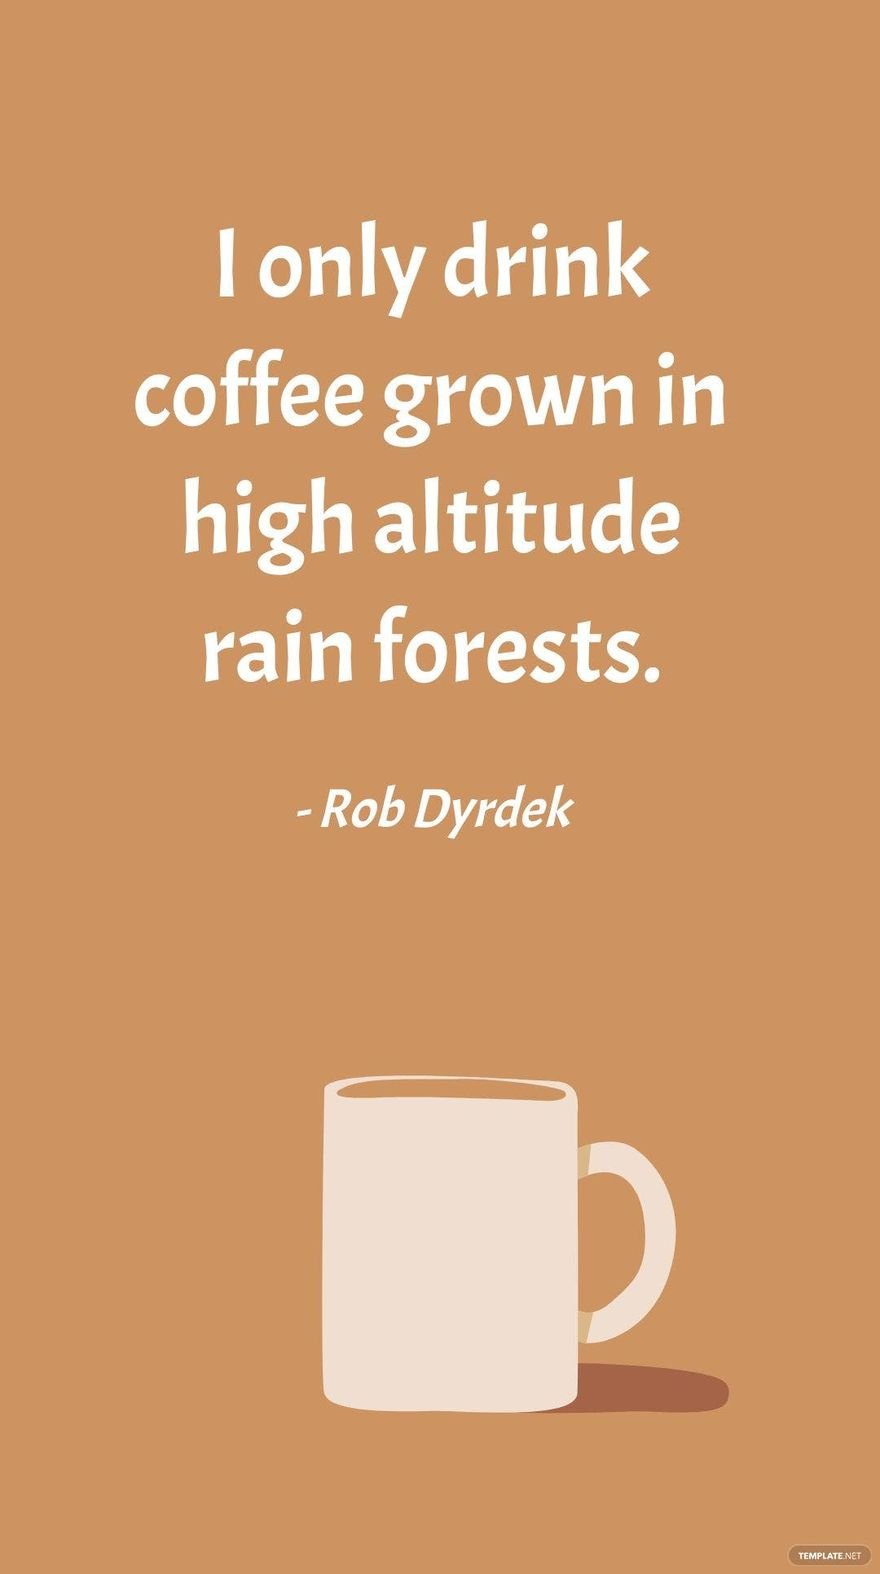 Rob Dyrdek - I only drink coffee grown in high altitude rain forests.